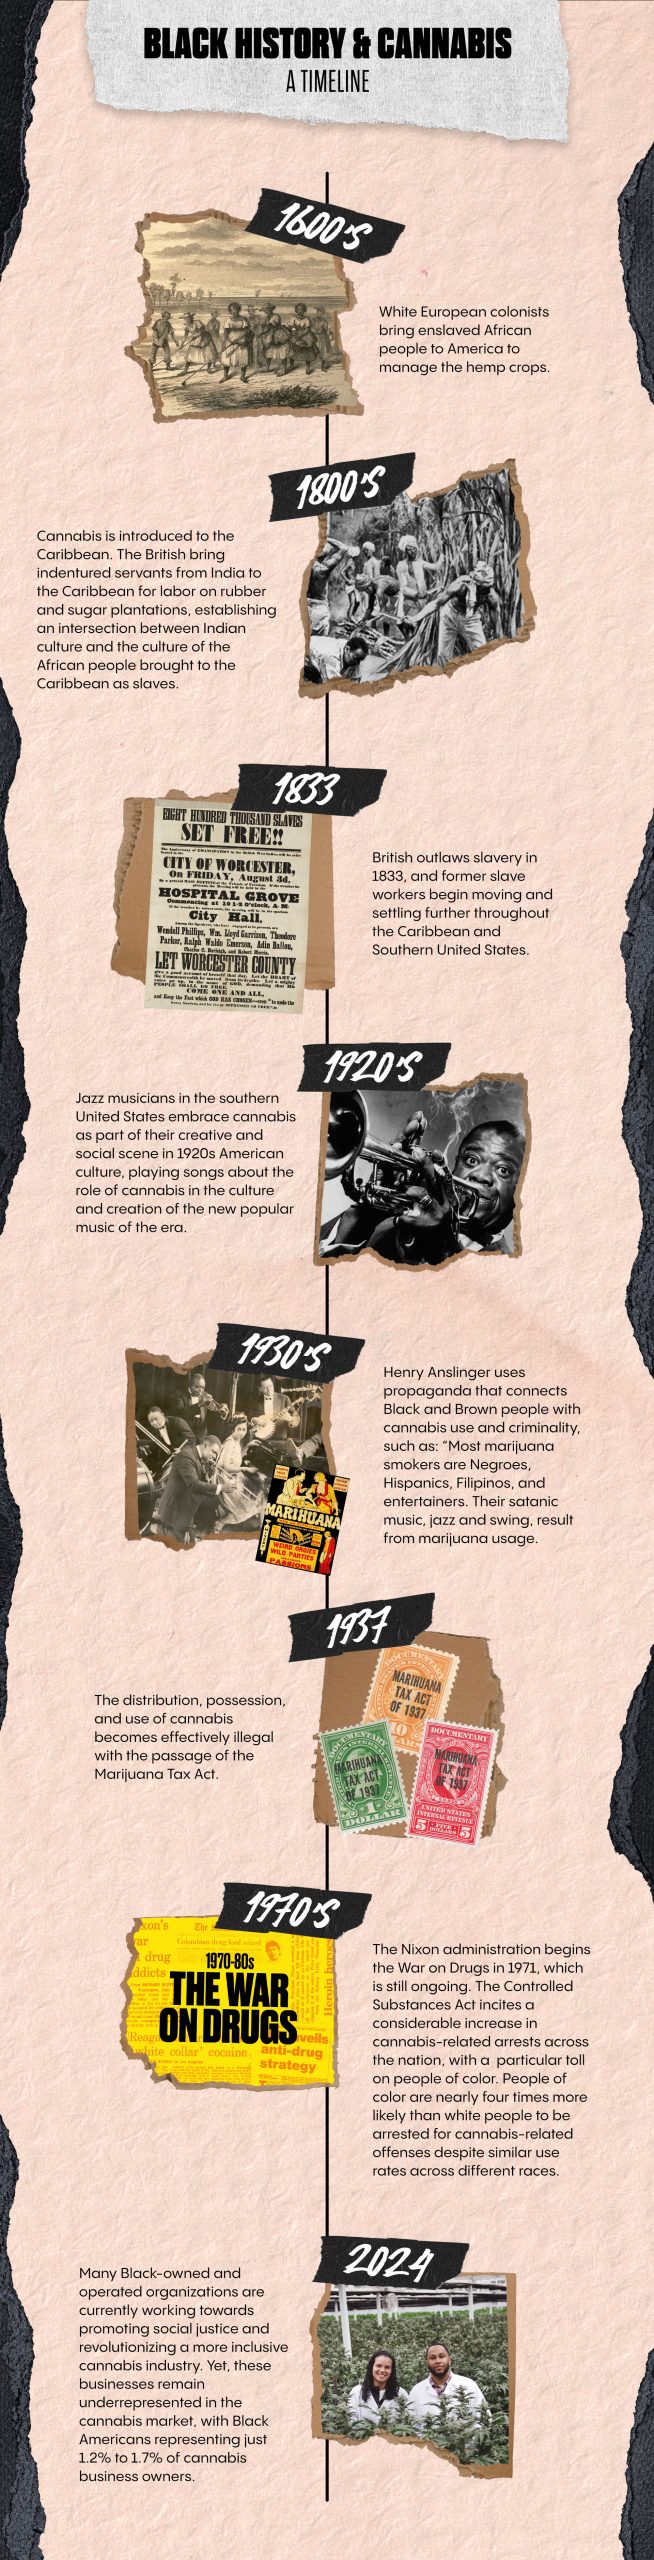 cannabis and black history timeline